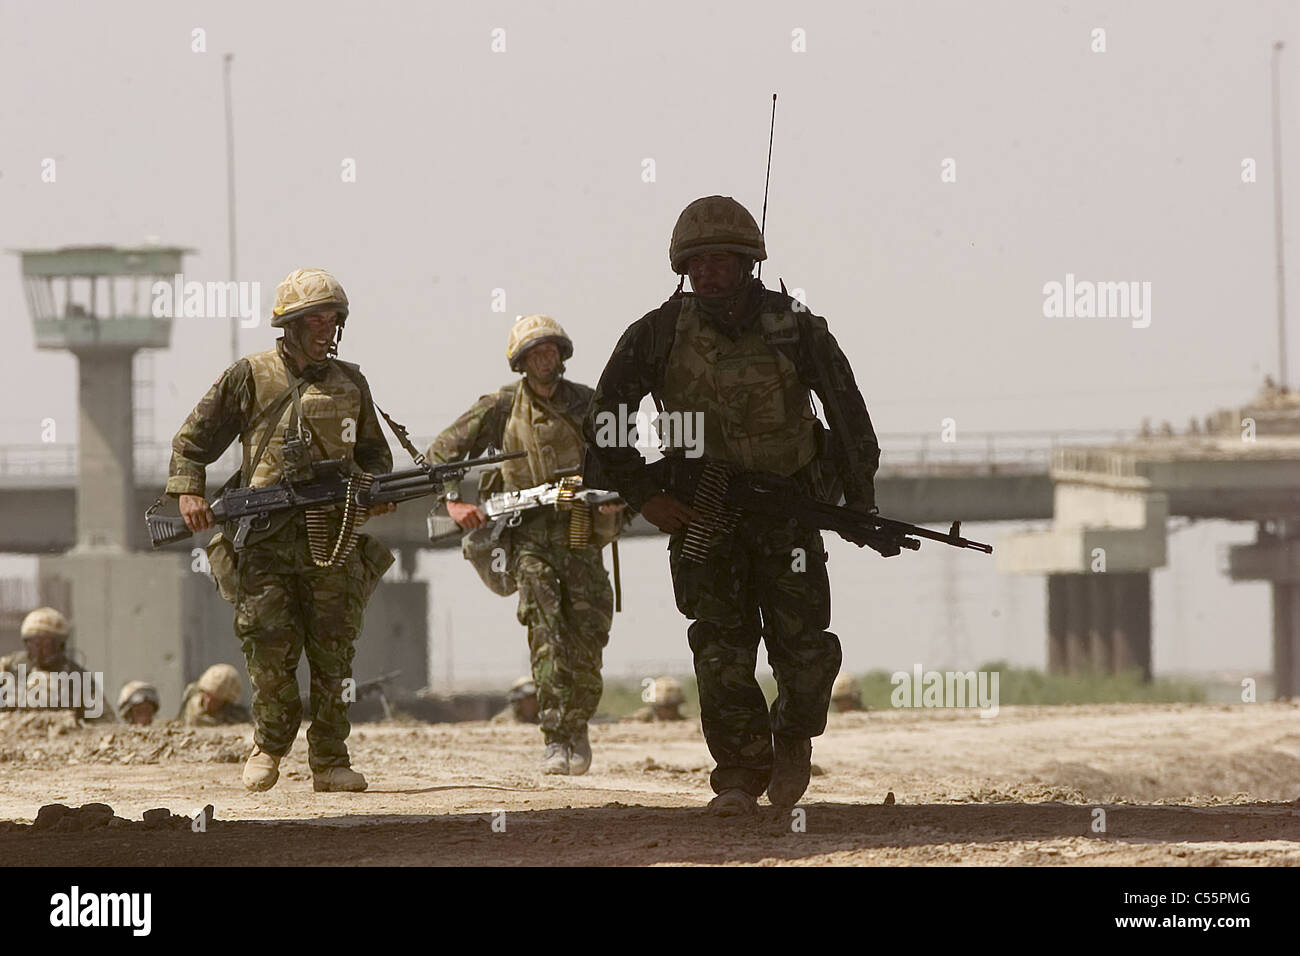 Royal Fusilier/Desert Rats enter the city of Basra, during the invasion of Iraq in 2003. Stock Photo